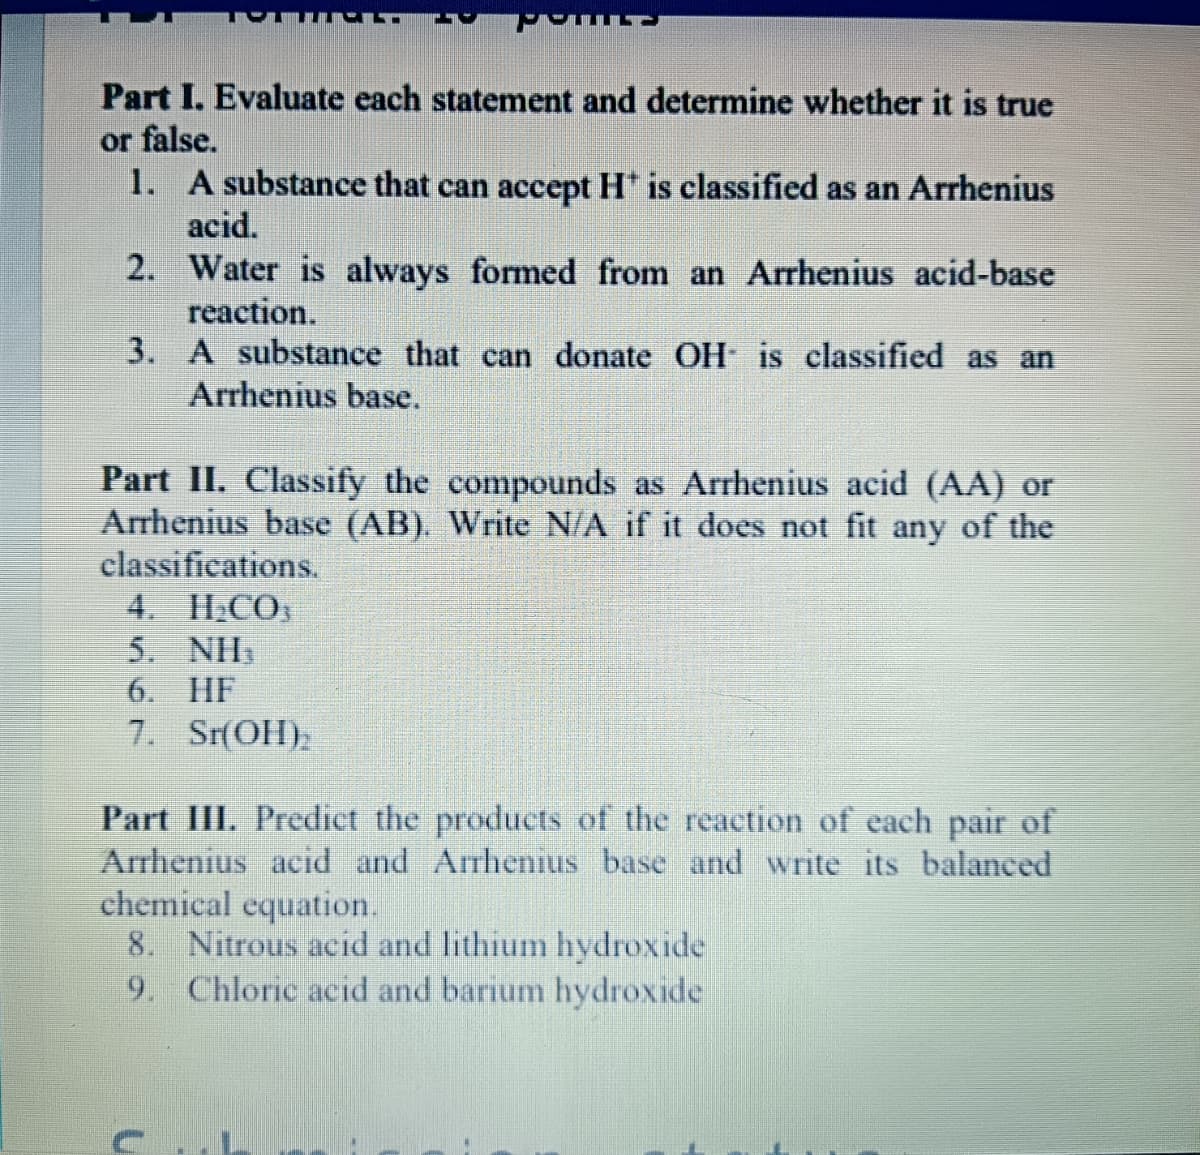 Part I. Evaluate each statement and determine whether it is true
or false.
1. A substance that can accept H' is classified as an Arrhenius
acid.
2. Water is always formed from an Arrhenius acid-base
reaction.
3. A substance that can donate OH is classified as an
Arrhenius base.
Part II. Classify the compounds as Arrhenius acid (AA) or
Arrhenius base (AB). Write N/A if it does not fit any of the
classifications.
4. H;CO
5. NH,
6. HF
7. Sr(OH),
Part III. Predict the products of the reaction of each pair of
Arrhenius acid and Arrhenius base and write its balanced
chemical equation.
8. Nitrous acid and lithium hydroxide
9. Chloric acid and barium hydroxide
